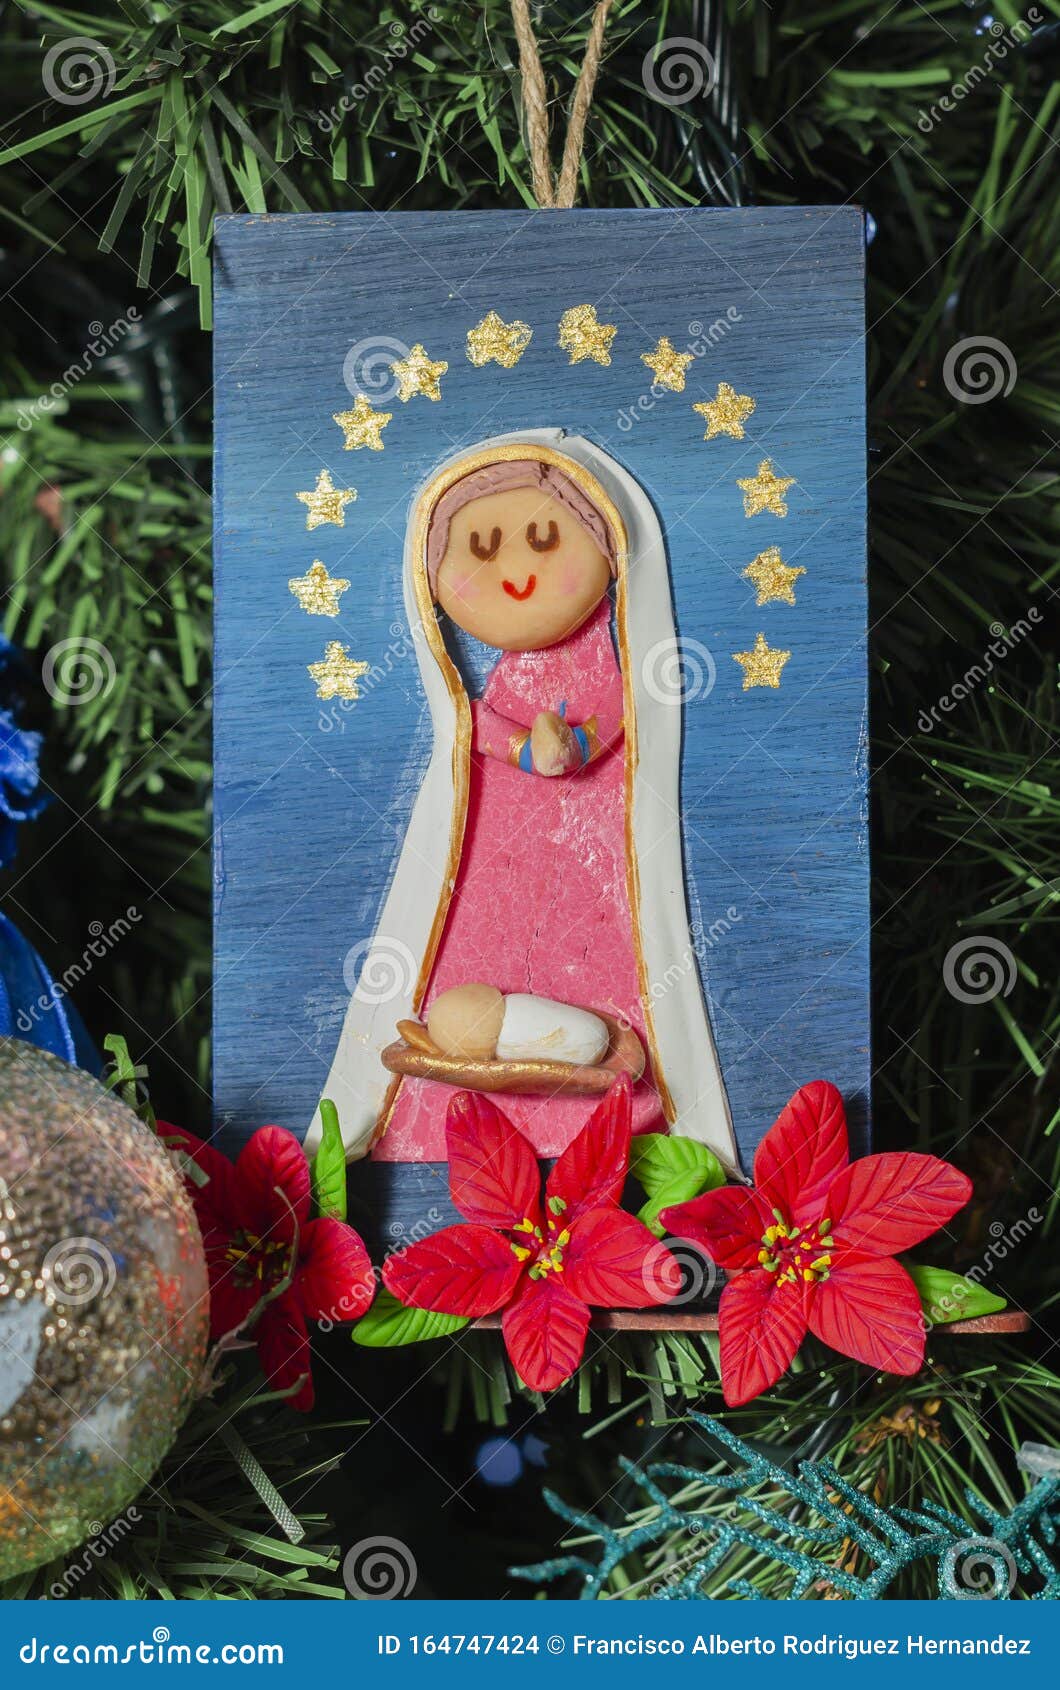 Handmade Decorations for Christmas Tree, Virgin Mary with Easter ...